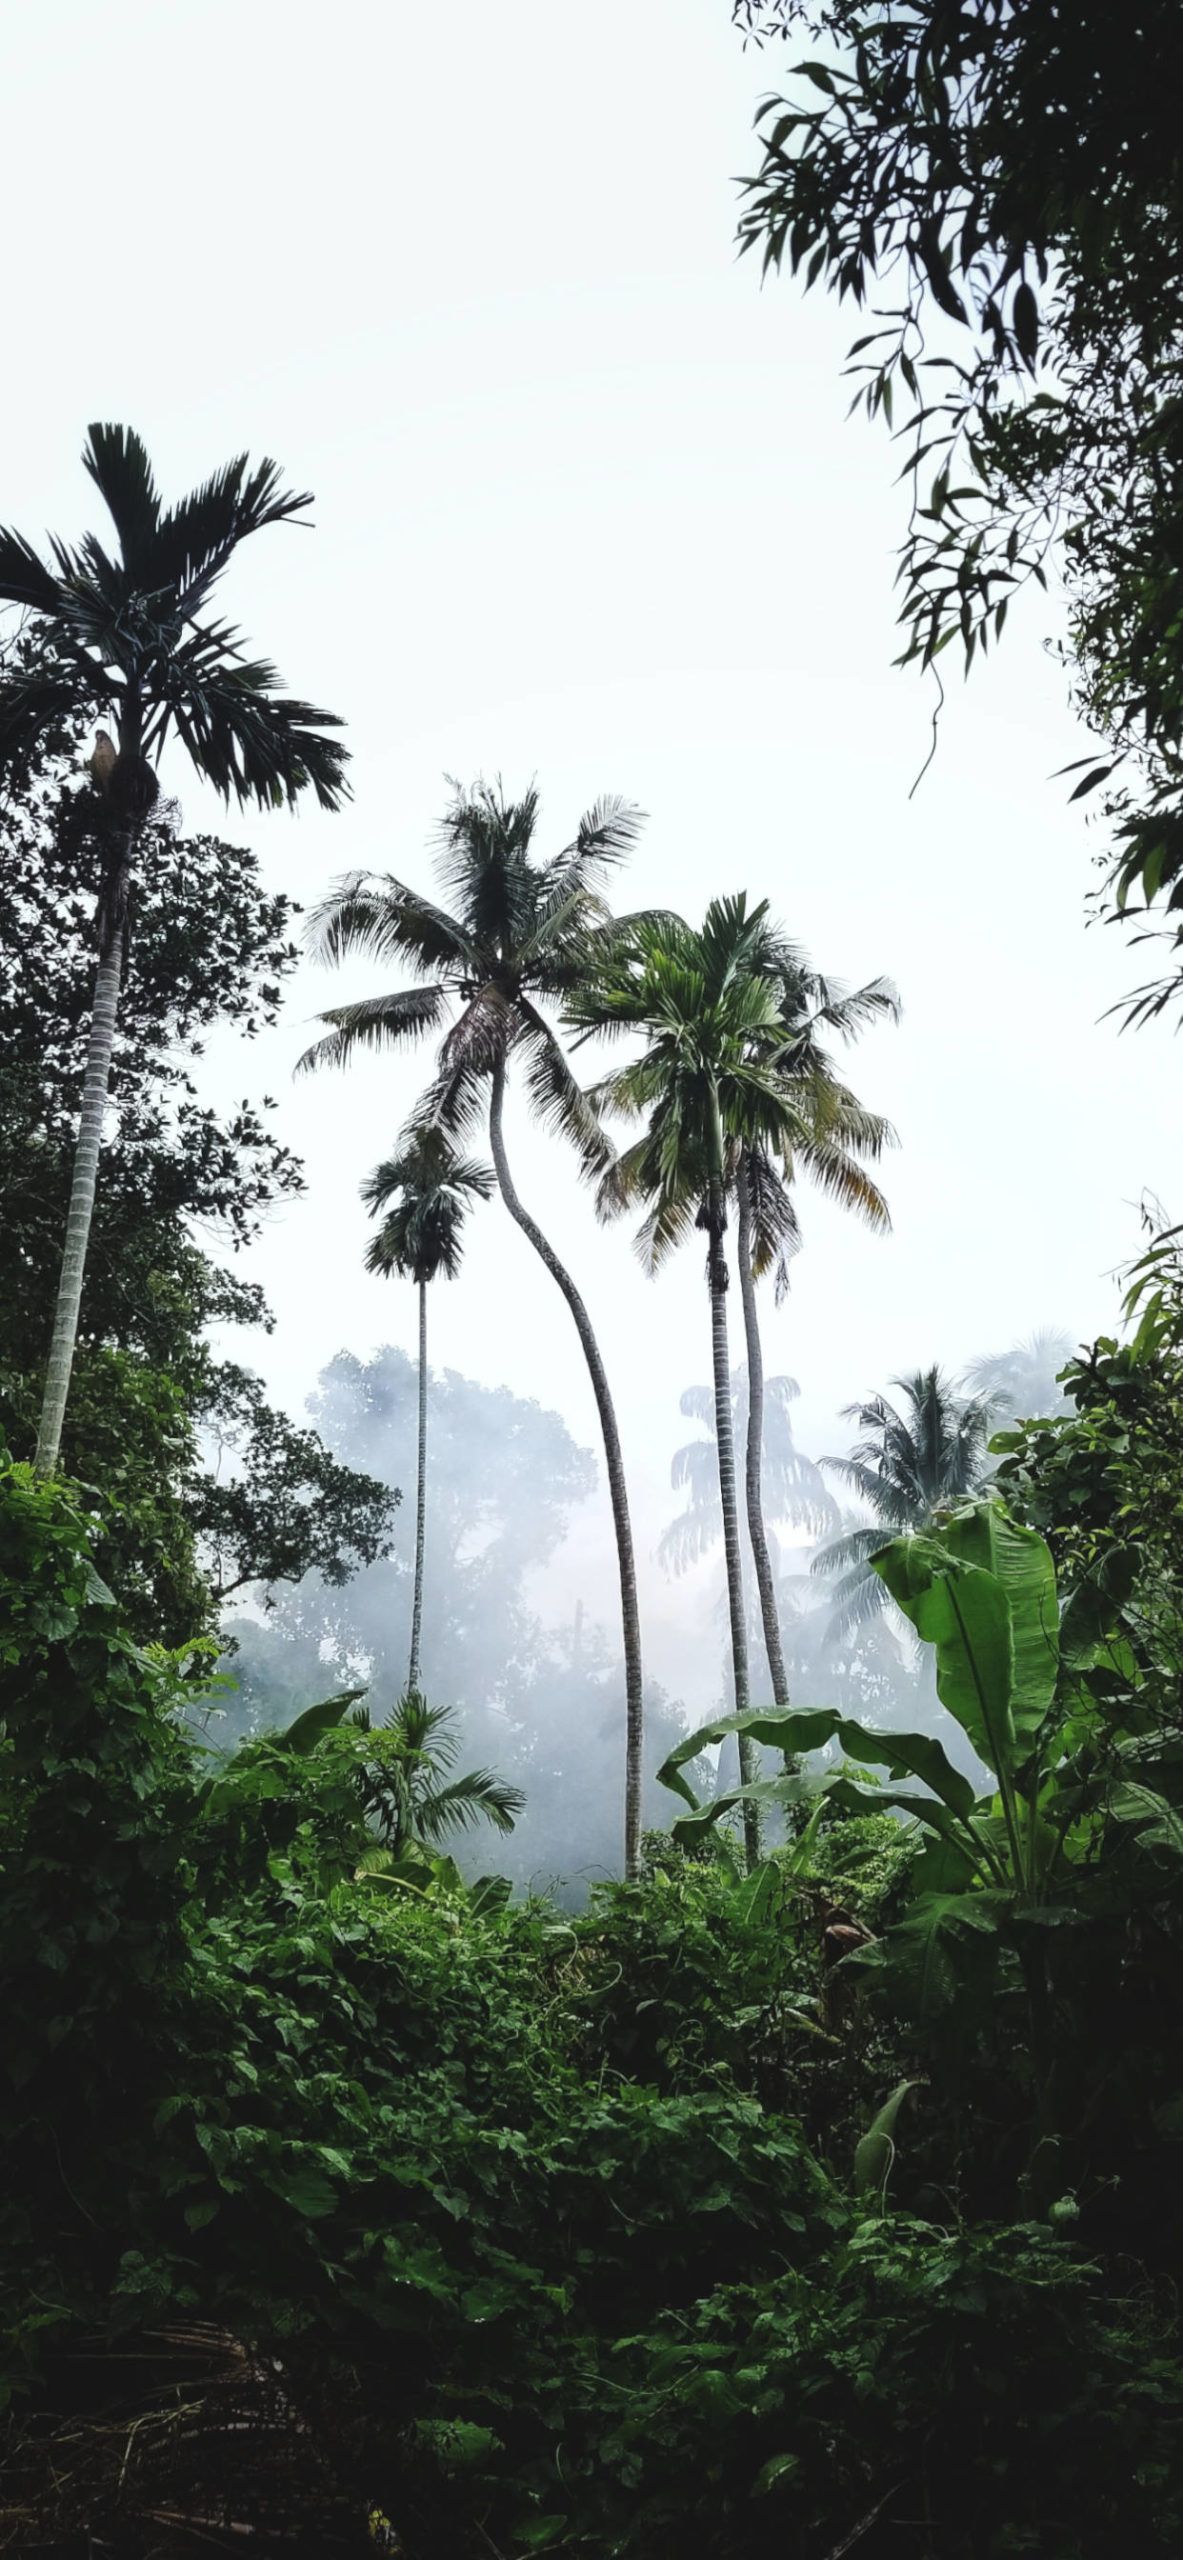 A group of palm trees standing tall in the middle of a forest. - Jungle